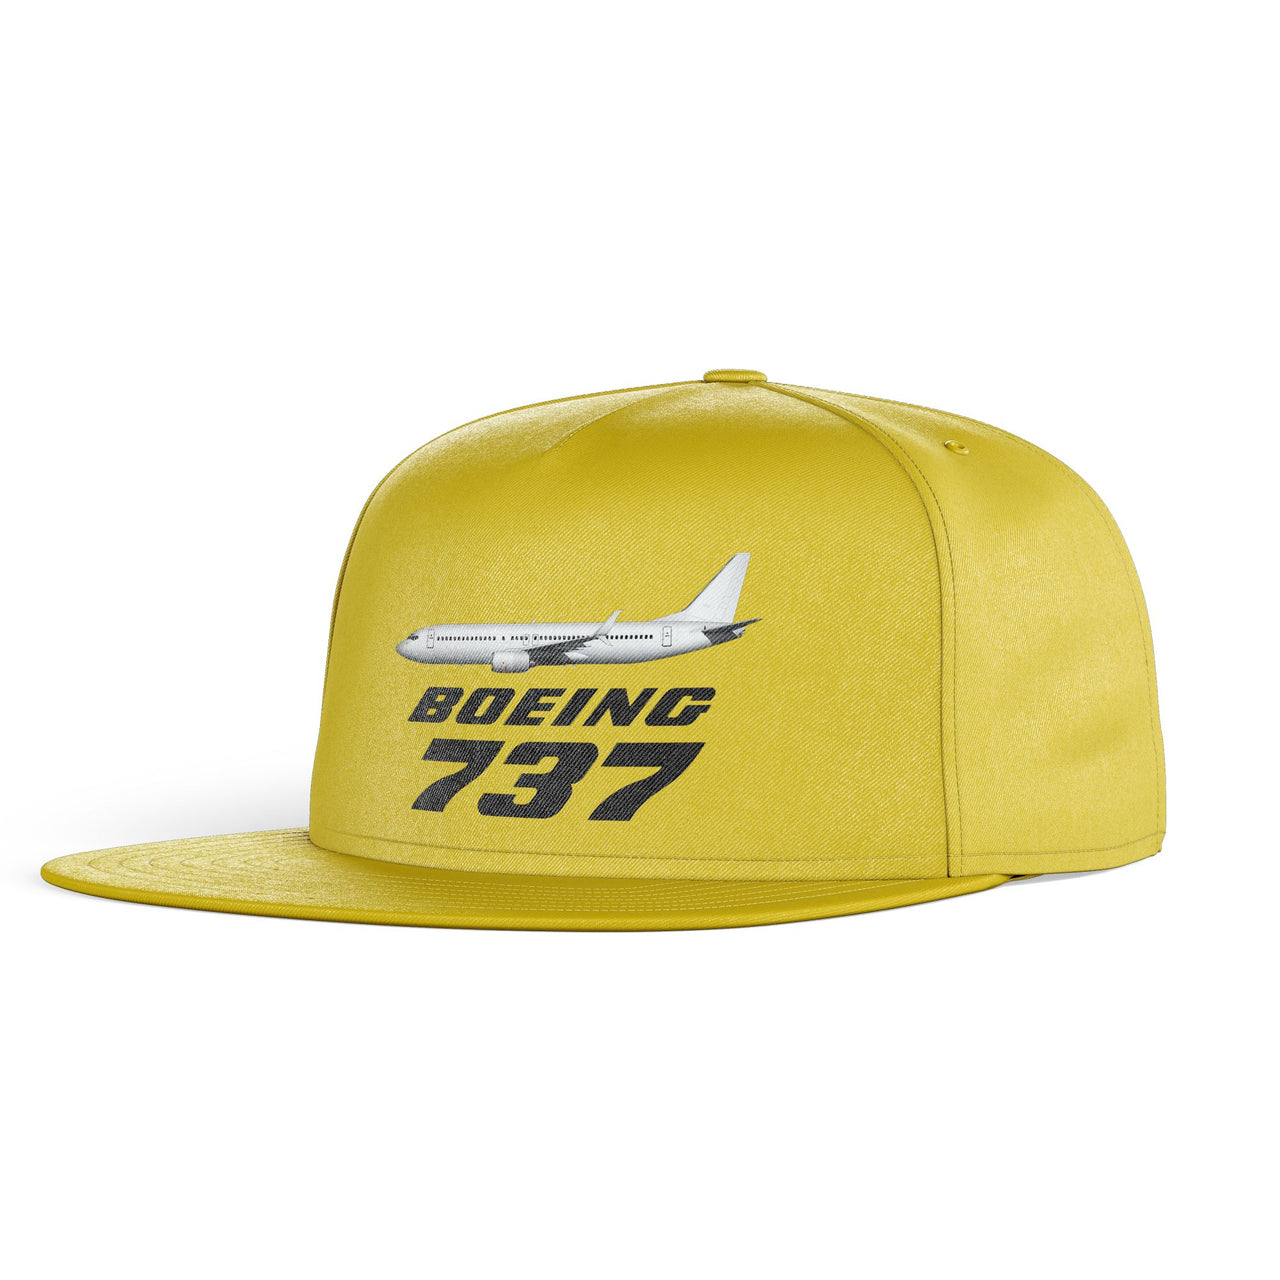 The Boeing 737 Designed Snapback Caps & Hats